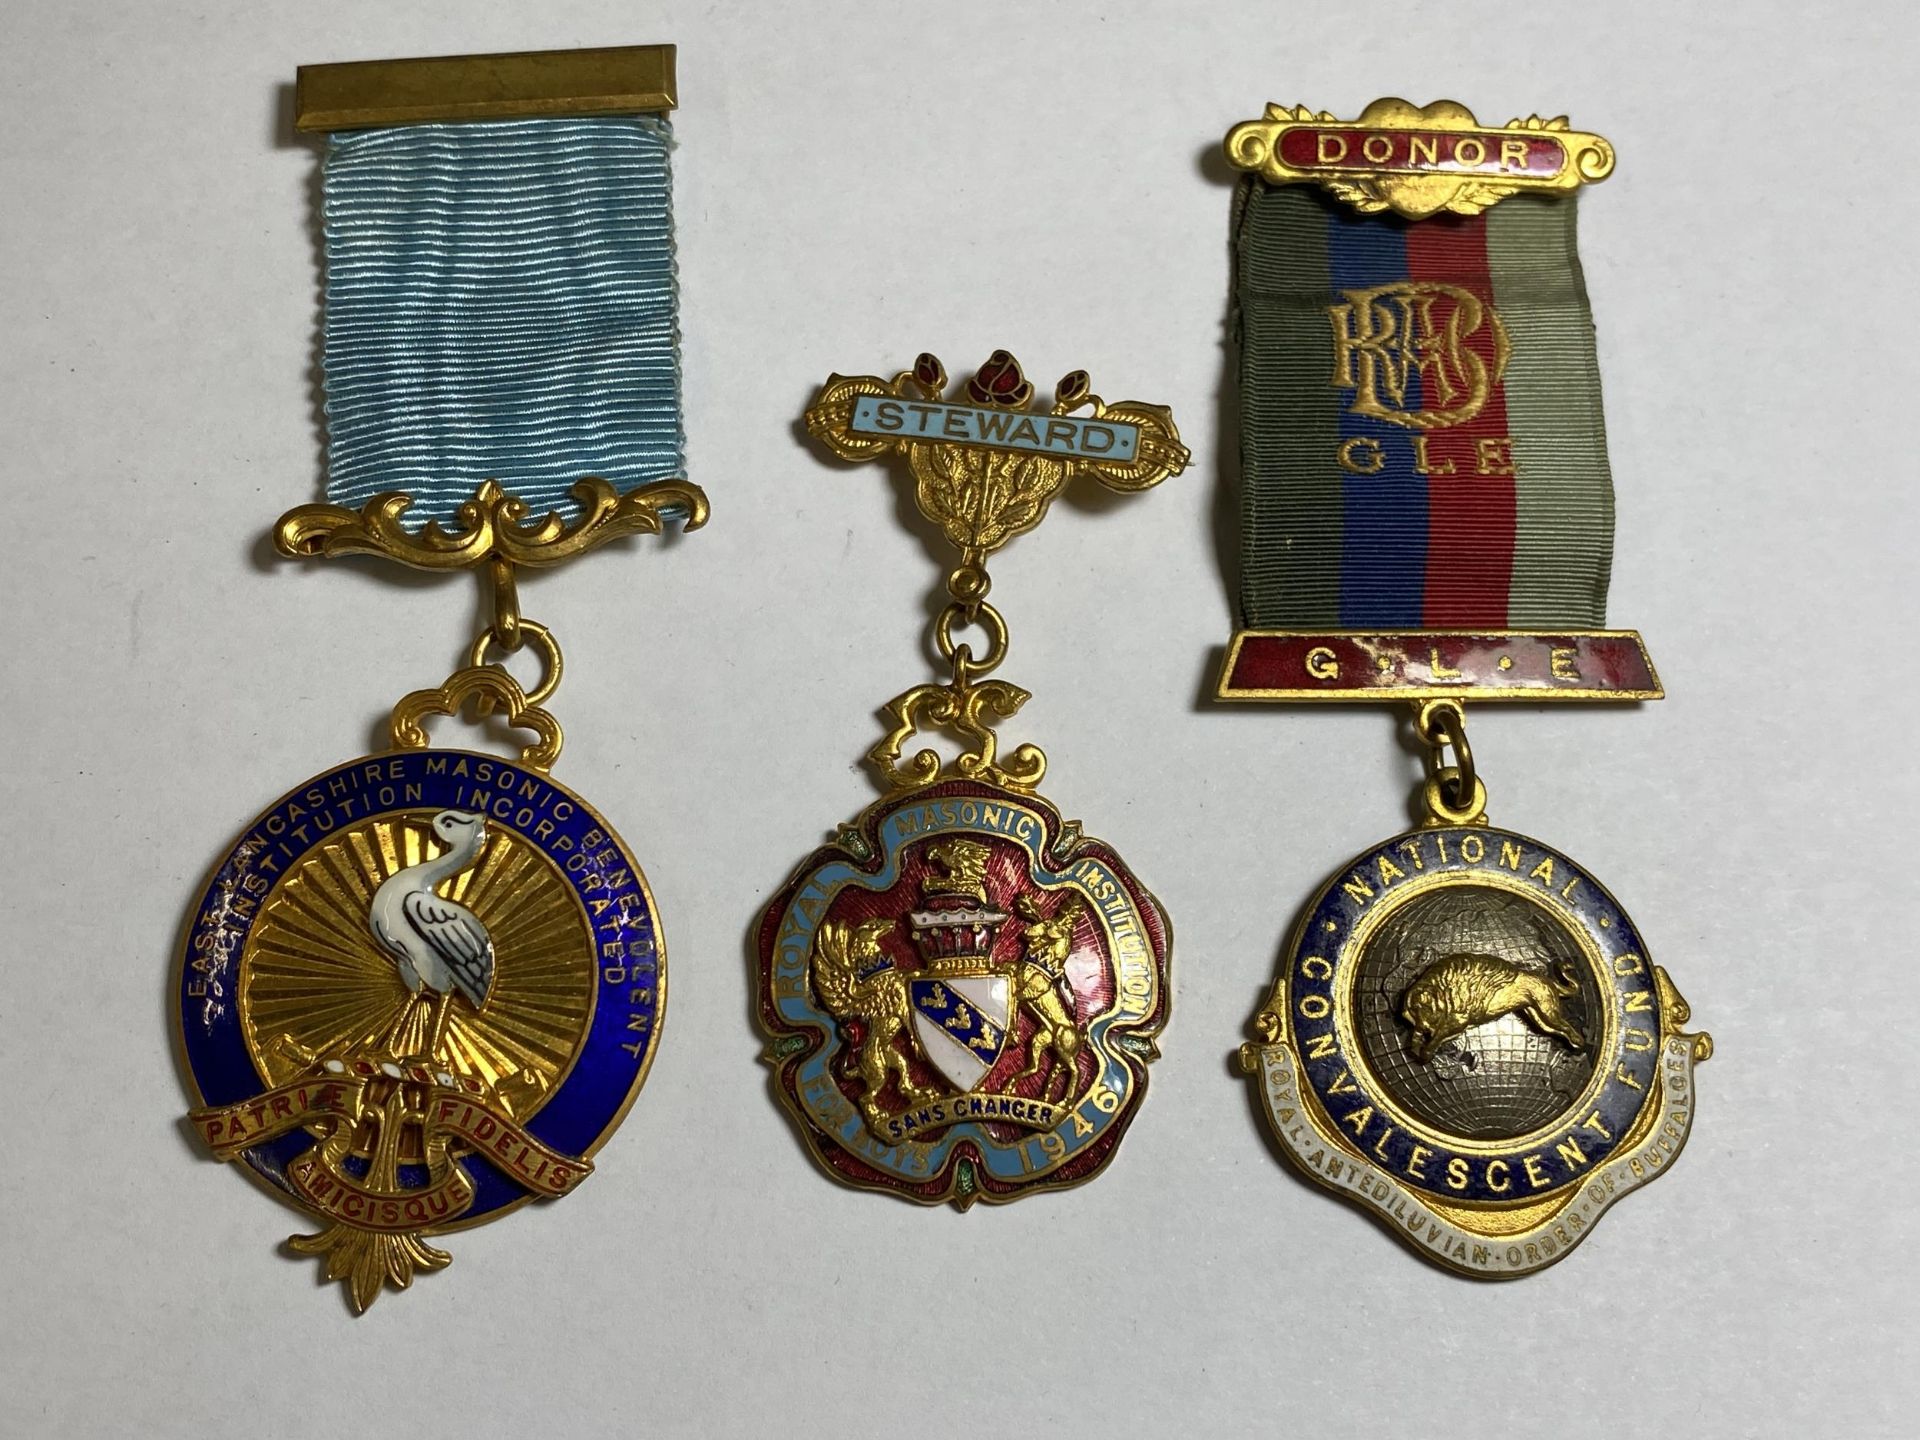 THREE VINTAGE MASONIC MEDALS TO INCLUDE A ORDER OF THE BUFFALOES EXAMPLE